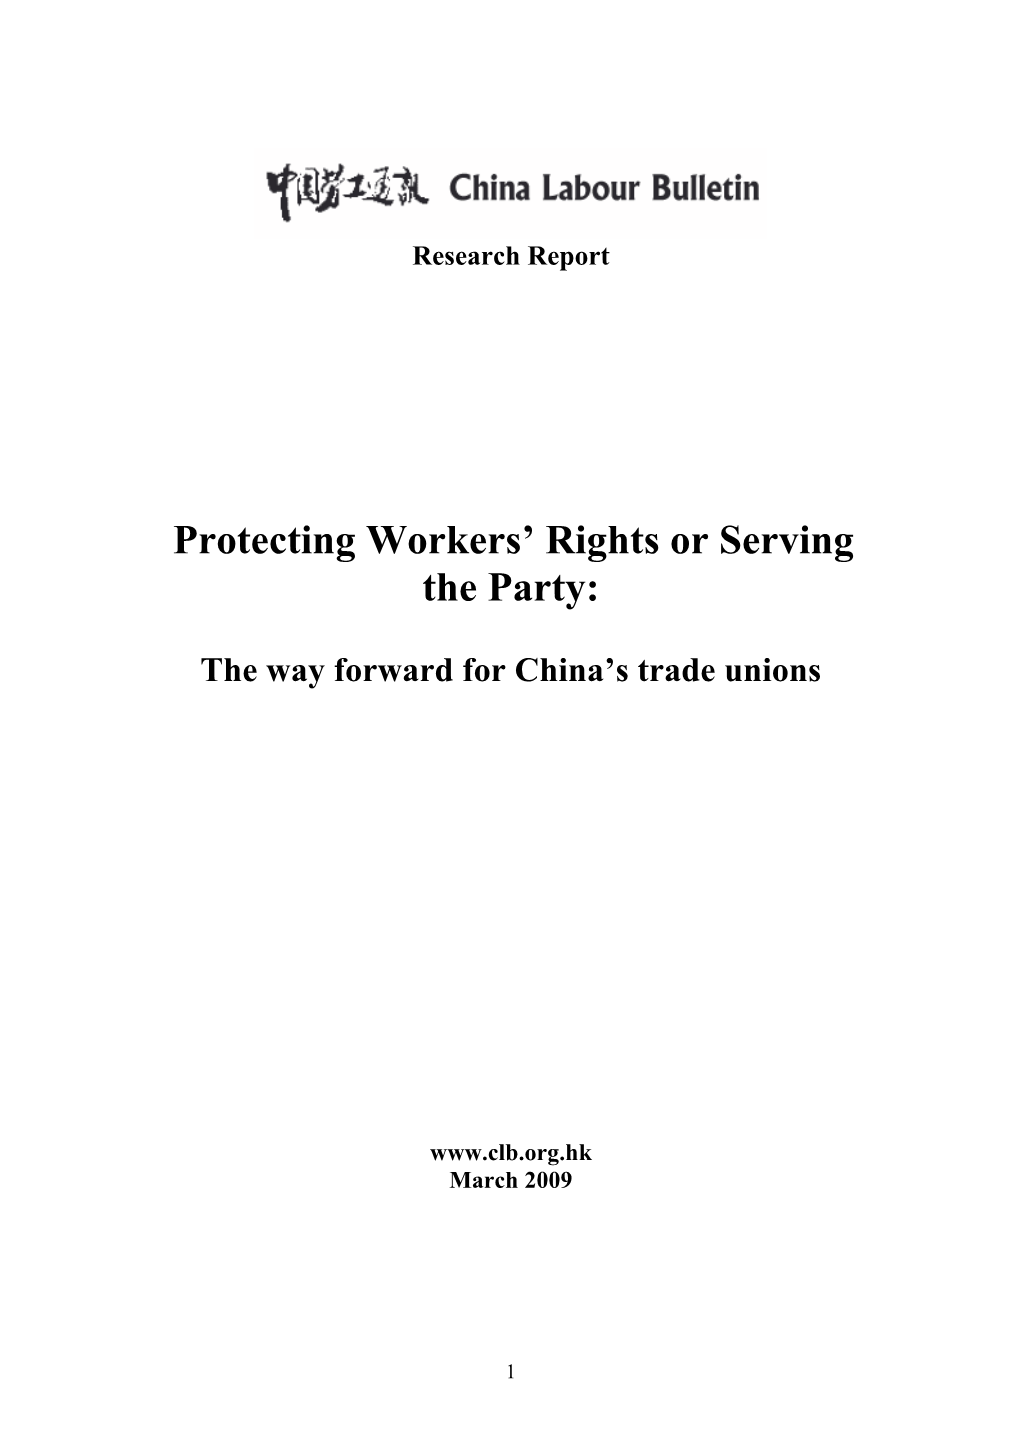 The Way Forward for China's Trade Unions